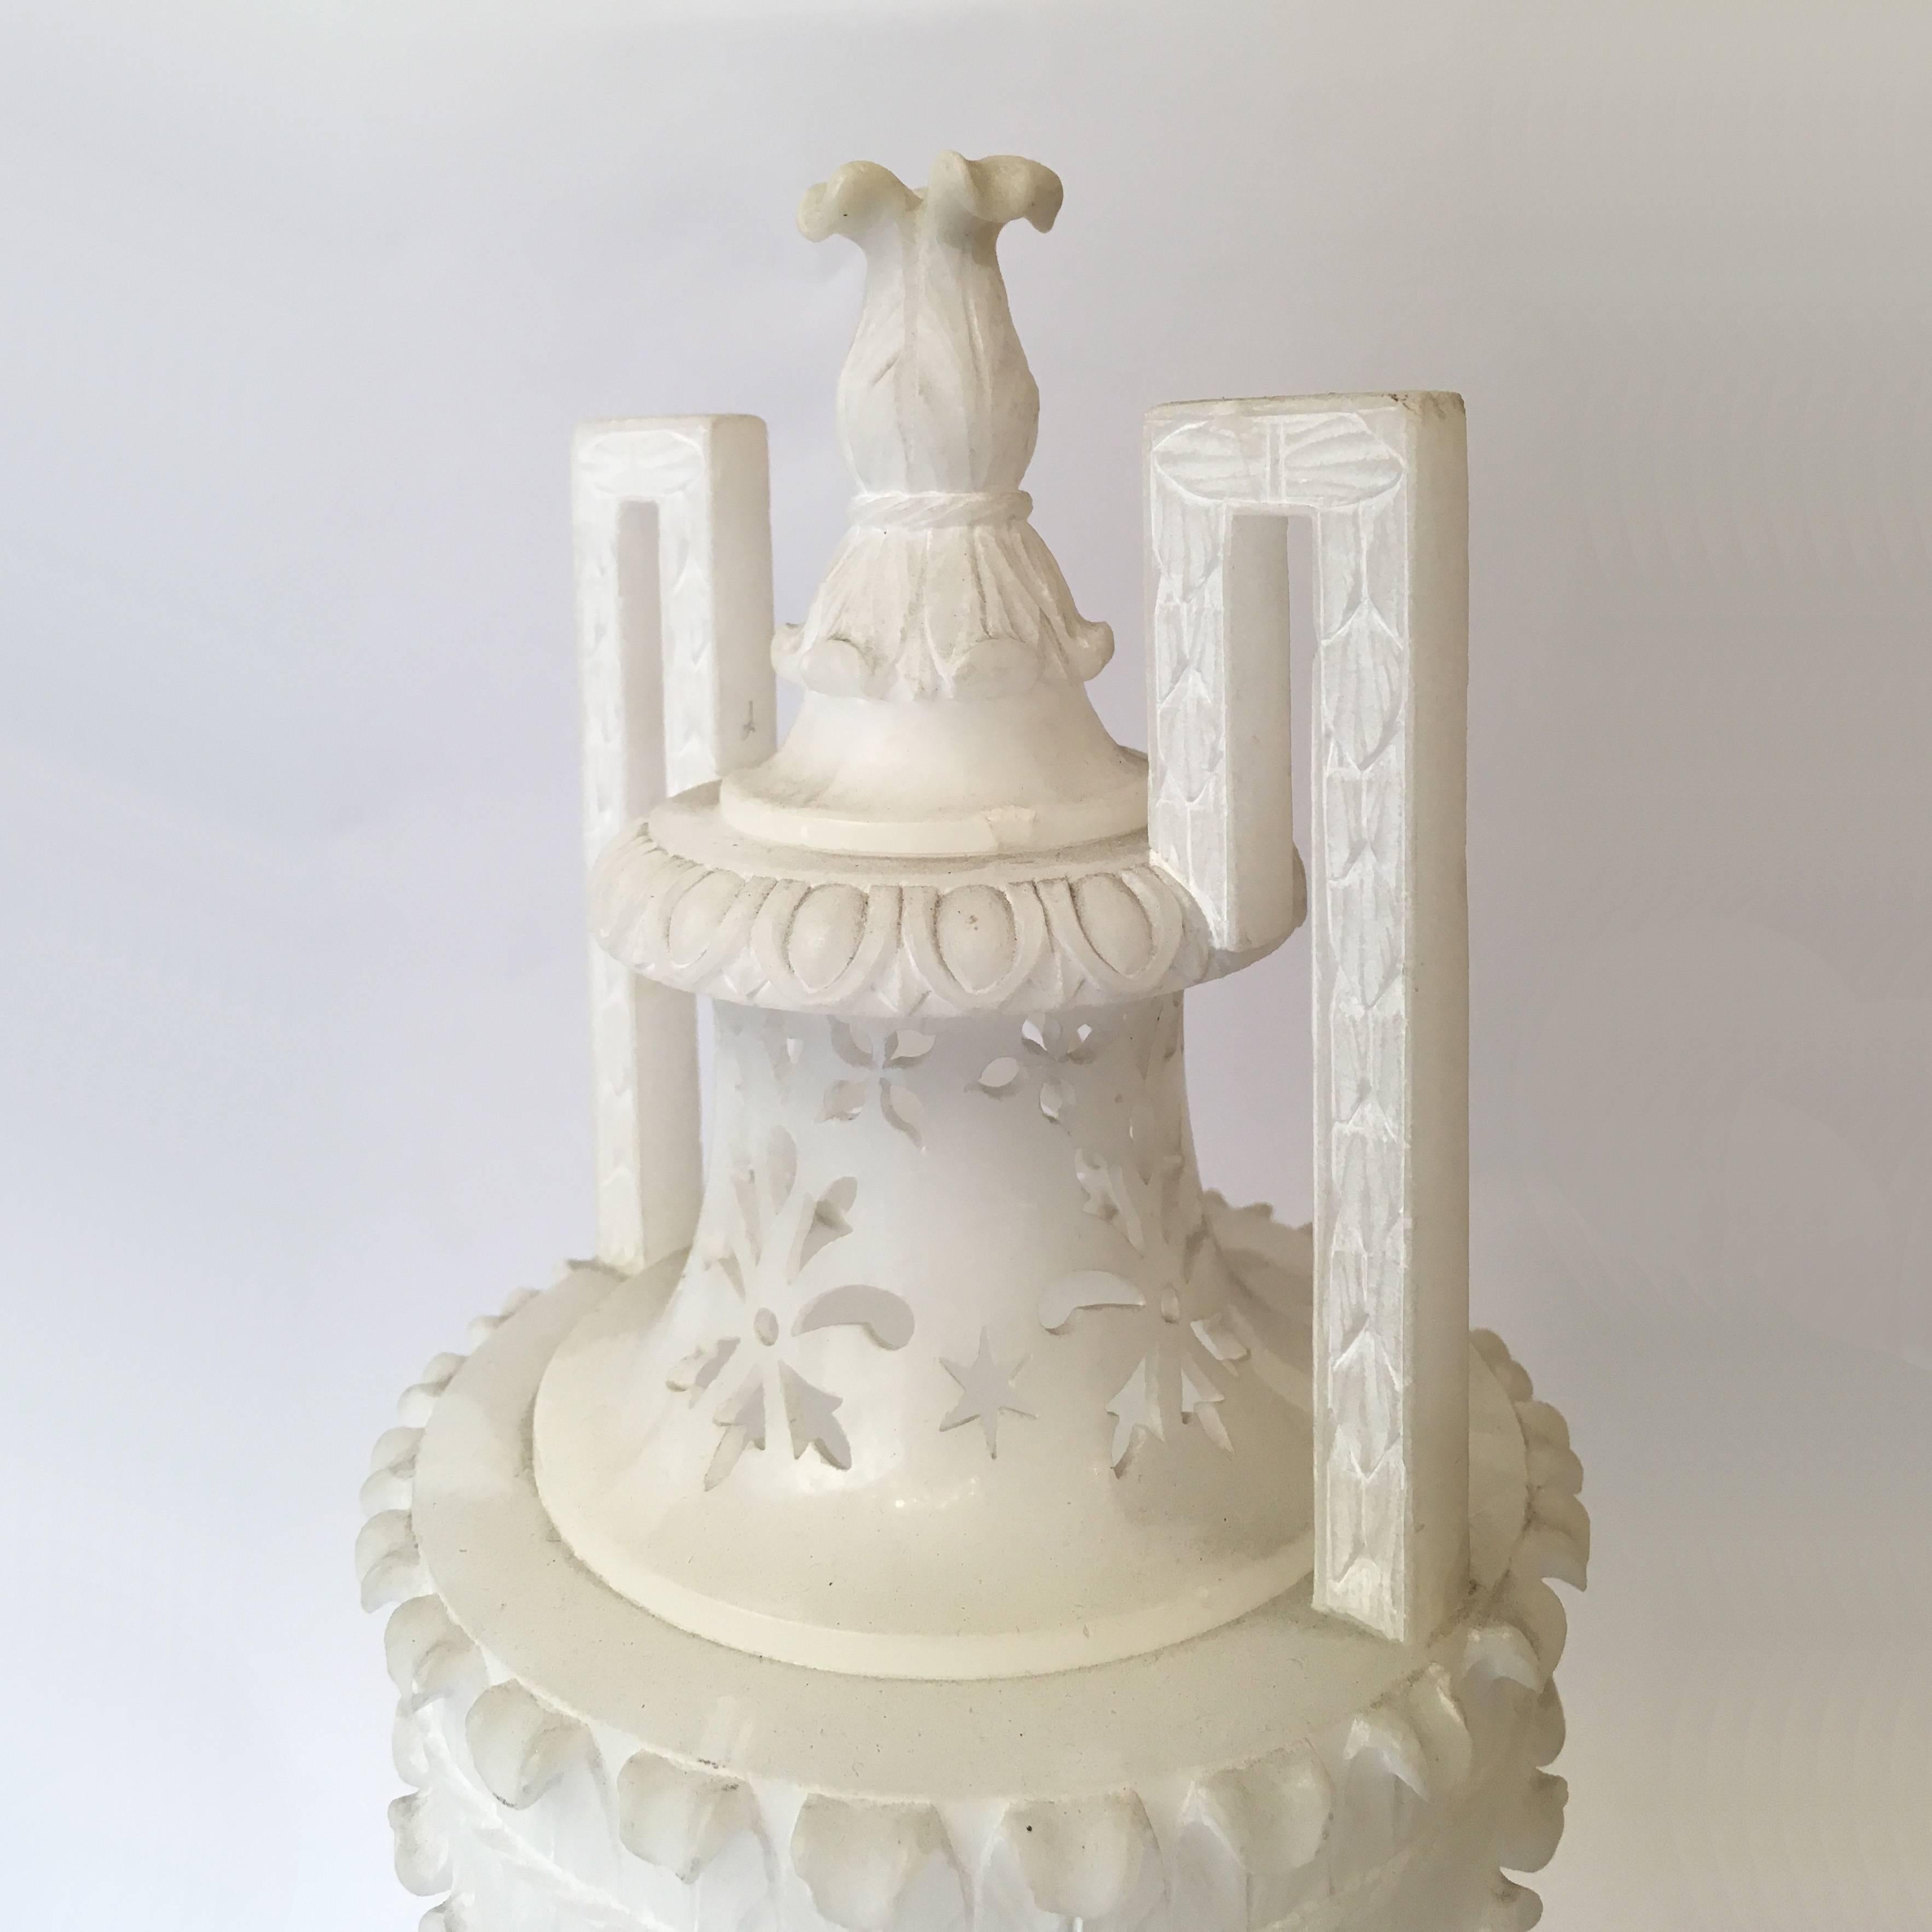 19th Century Italian Pair of Hand-Carved Neoclassical Alabaster Vases or Urns For Sale 7